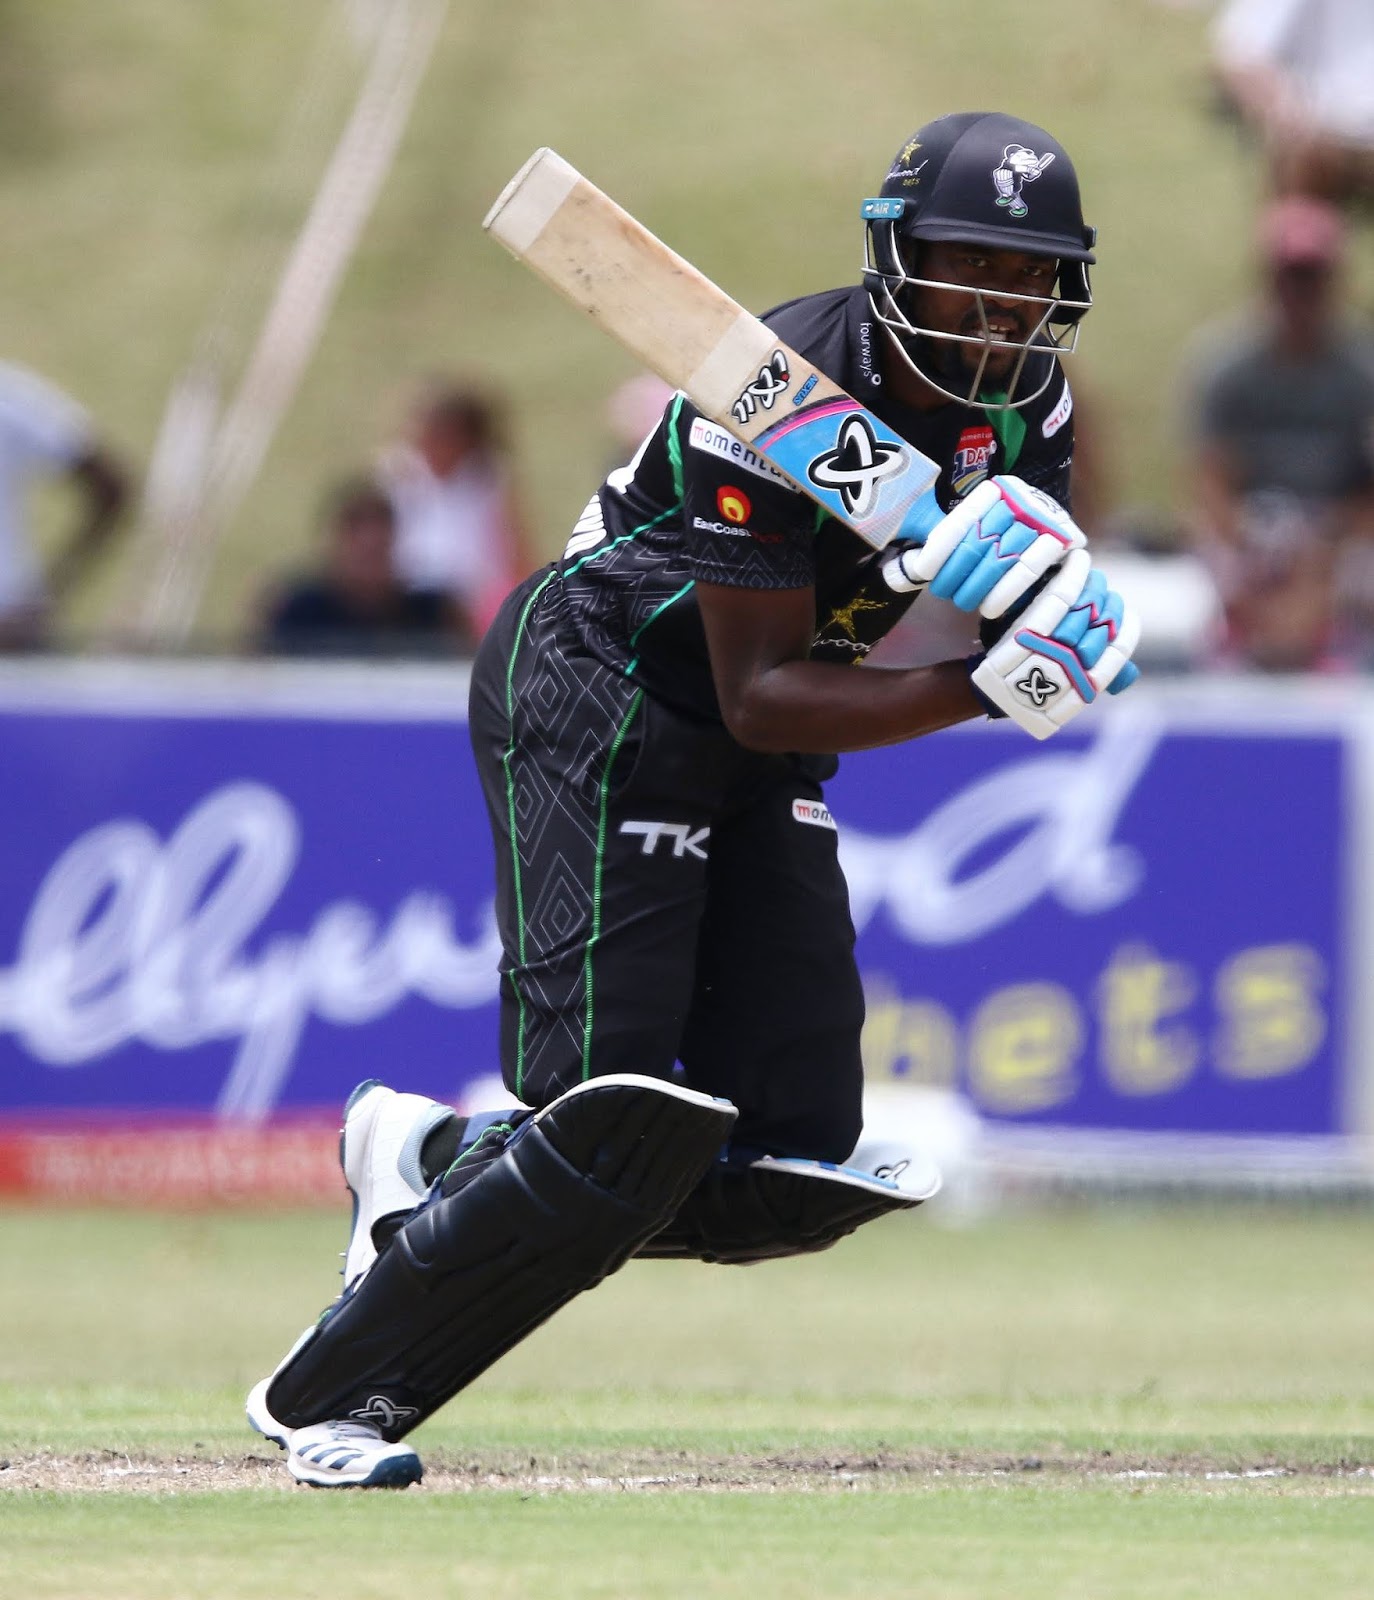 Andile Phehlukwayo batting for the Hollywoodbets Dolphins in the Momentum One Day Cup